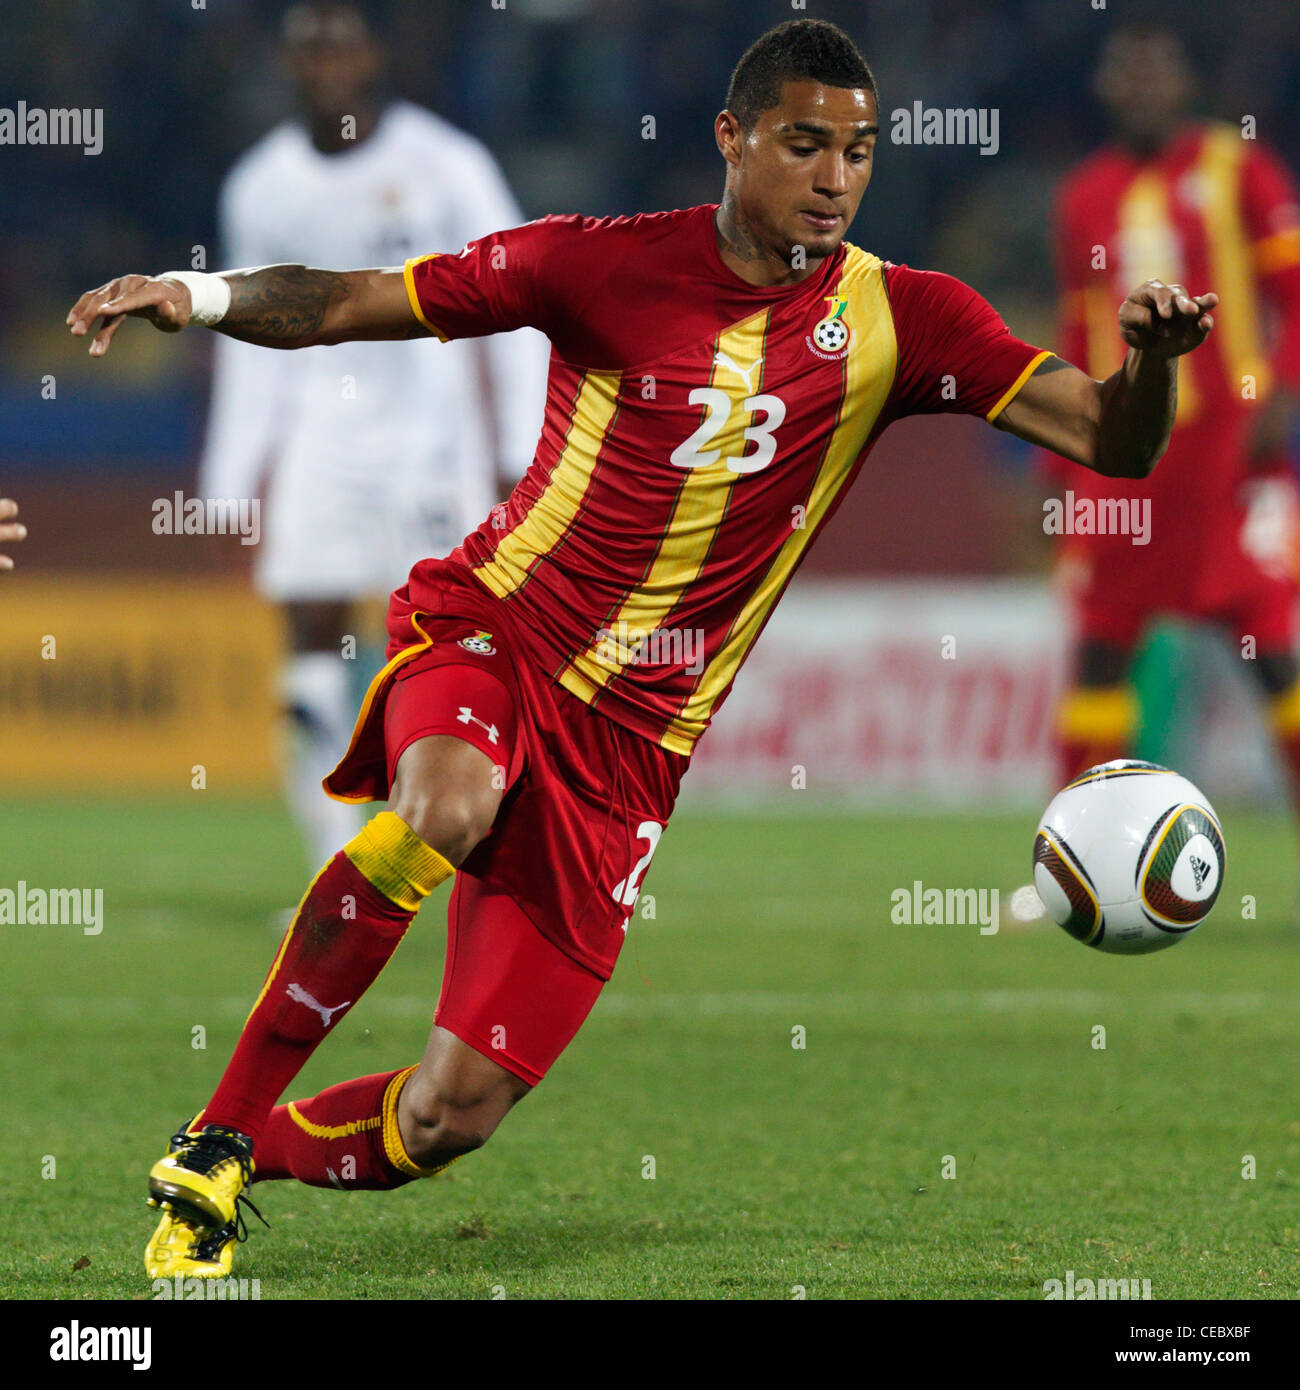 Kevin Prince Boateng of Ghana chases the ball during a 2010 FIFA World Cup round of 16 match against the United States. Stock Photo